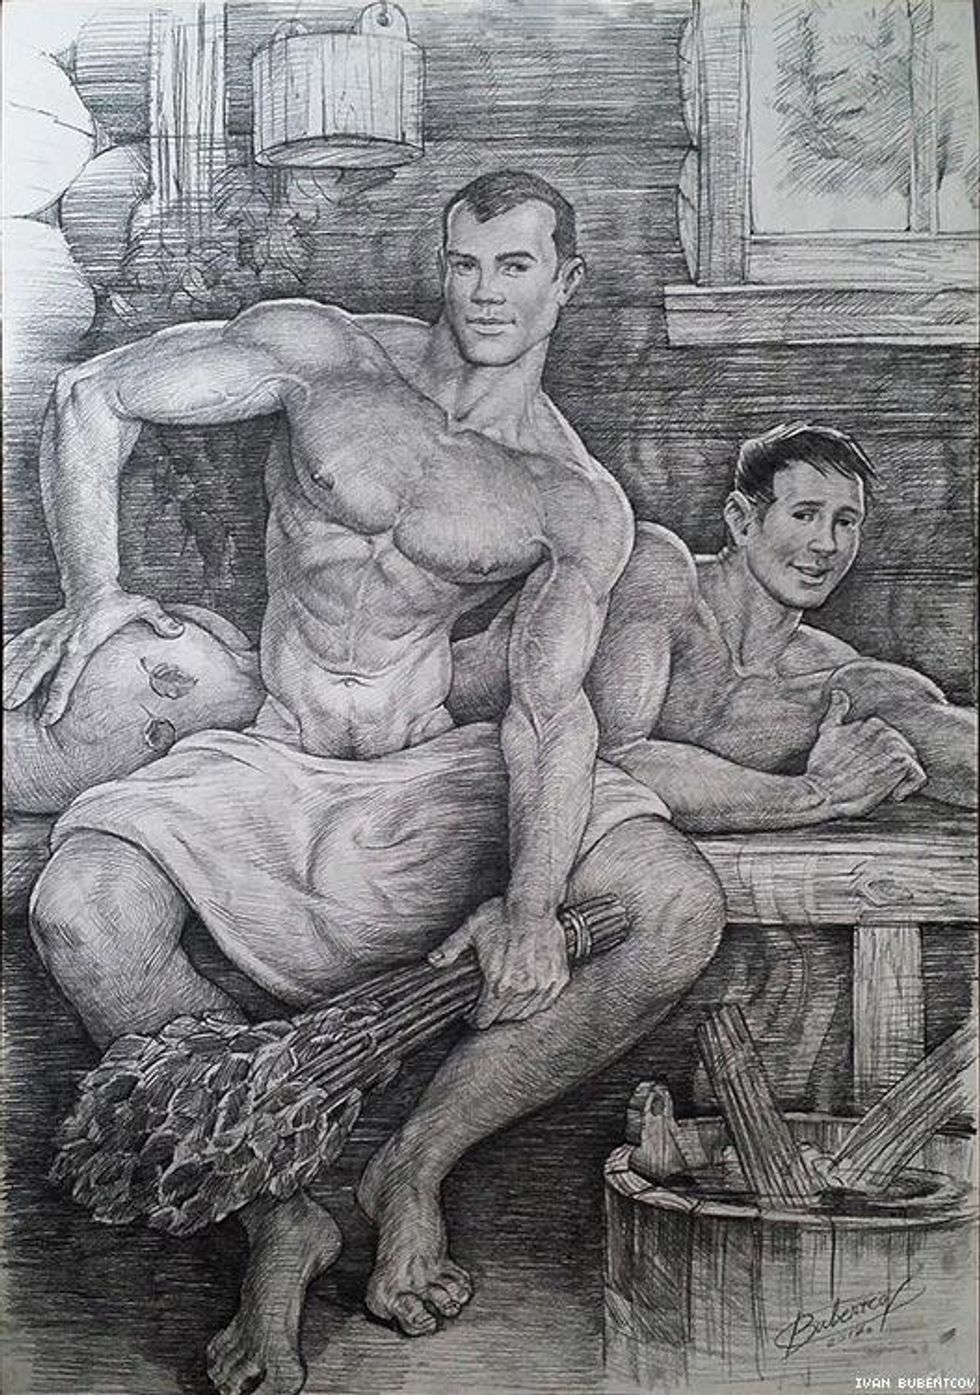 Despite the problems of being a gay artist in Russia, Ivan Bubentcov has created a vast archive of wonderfully erotic art.